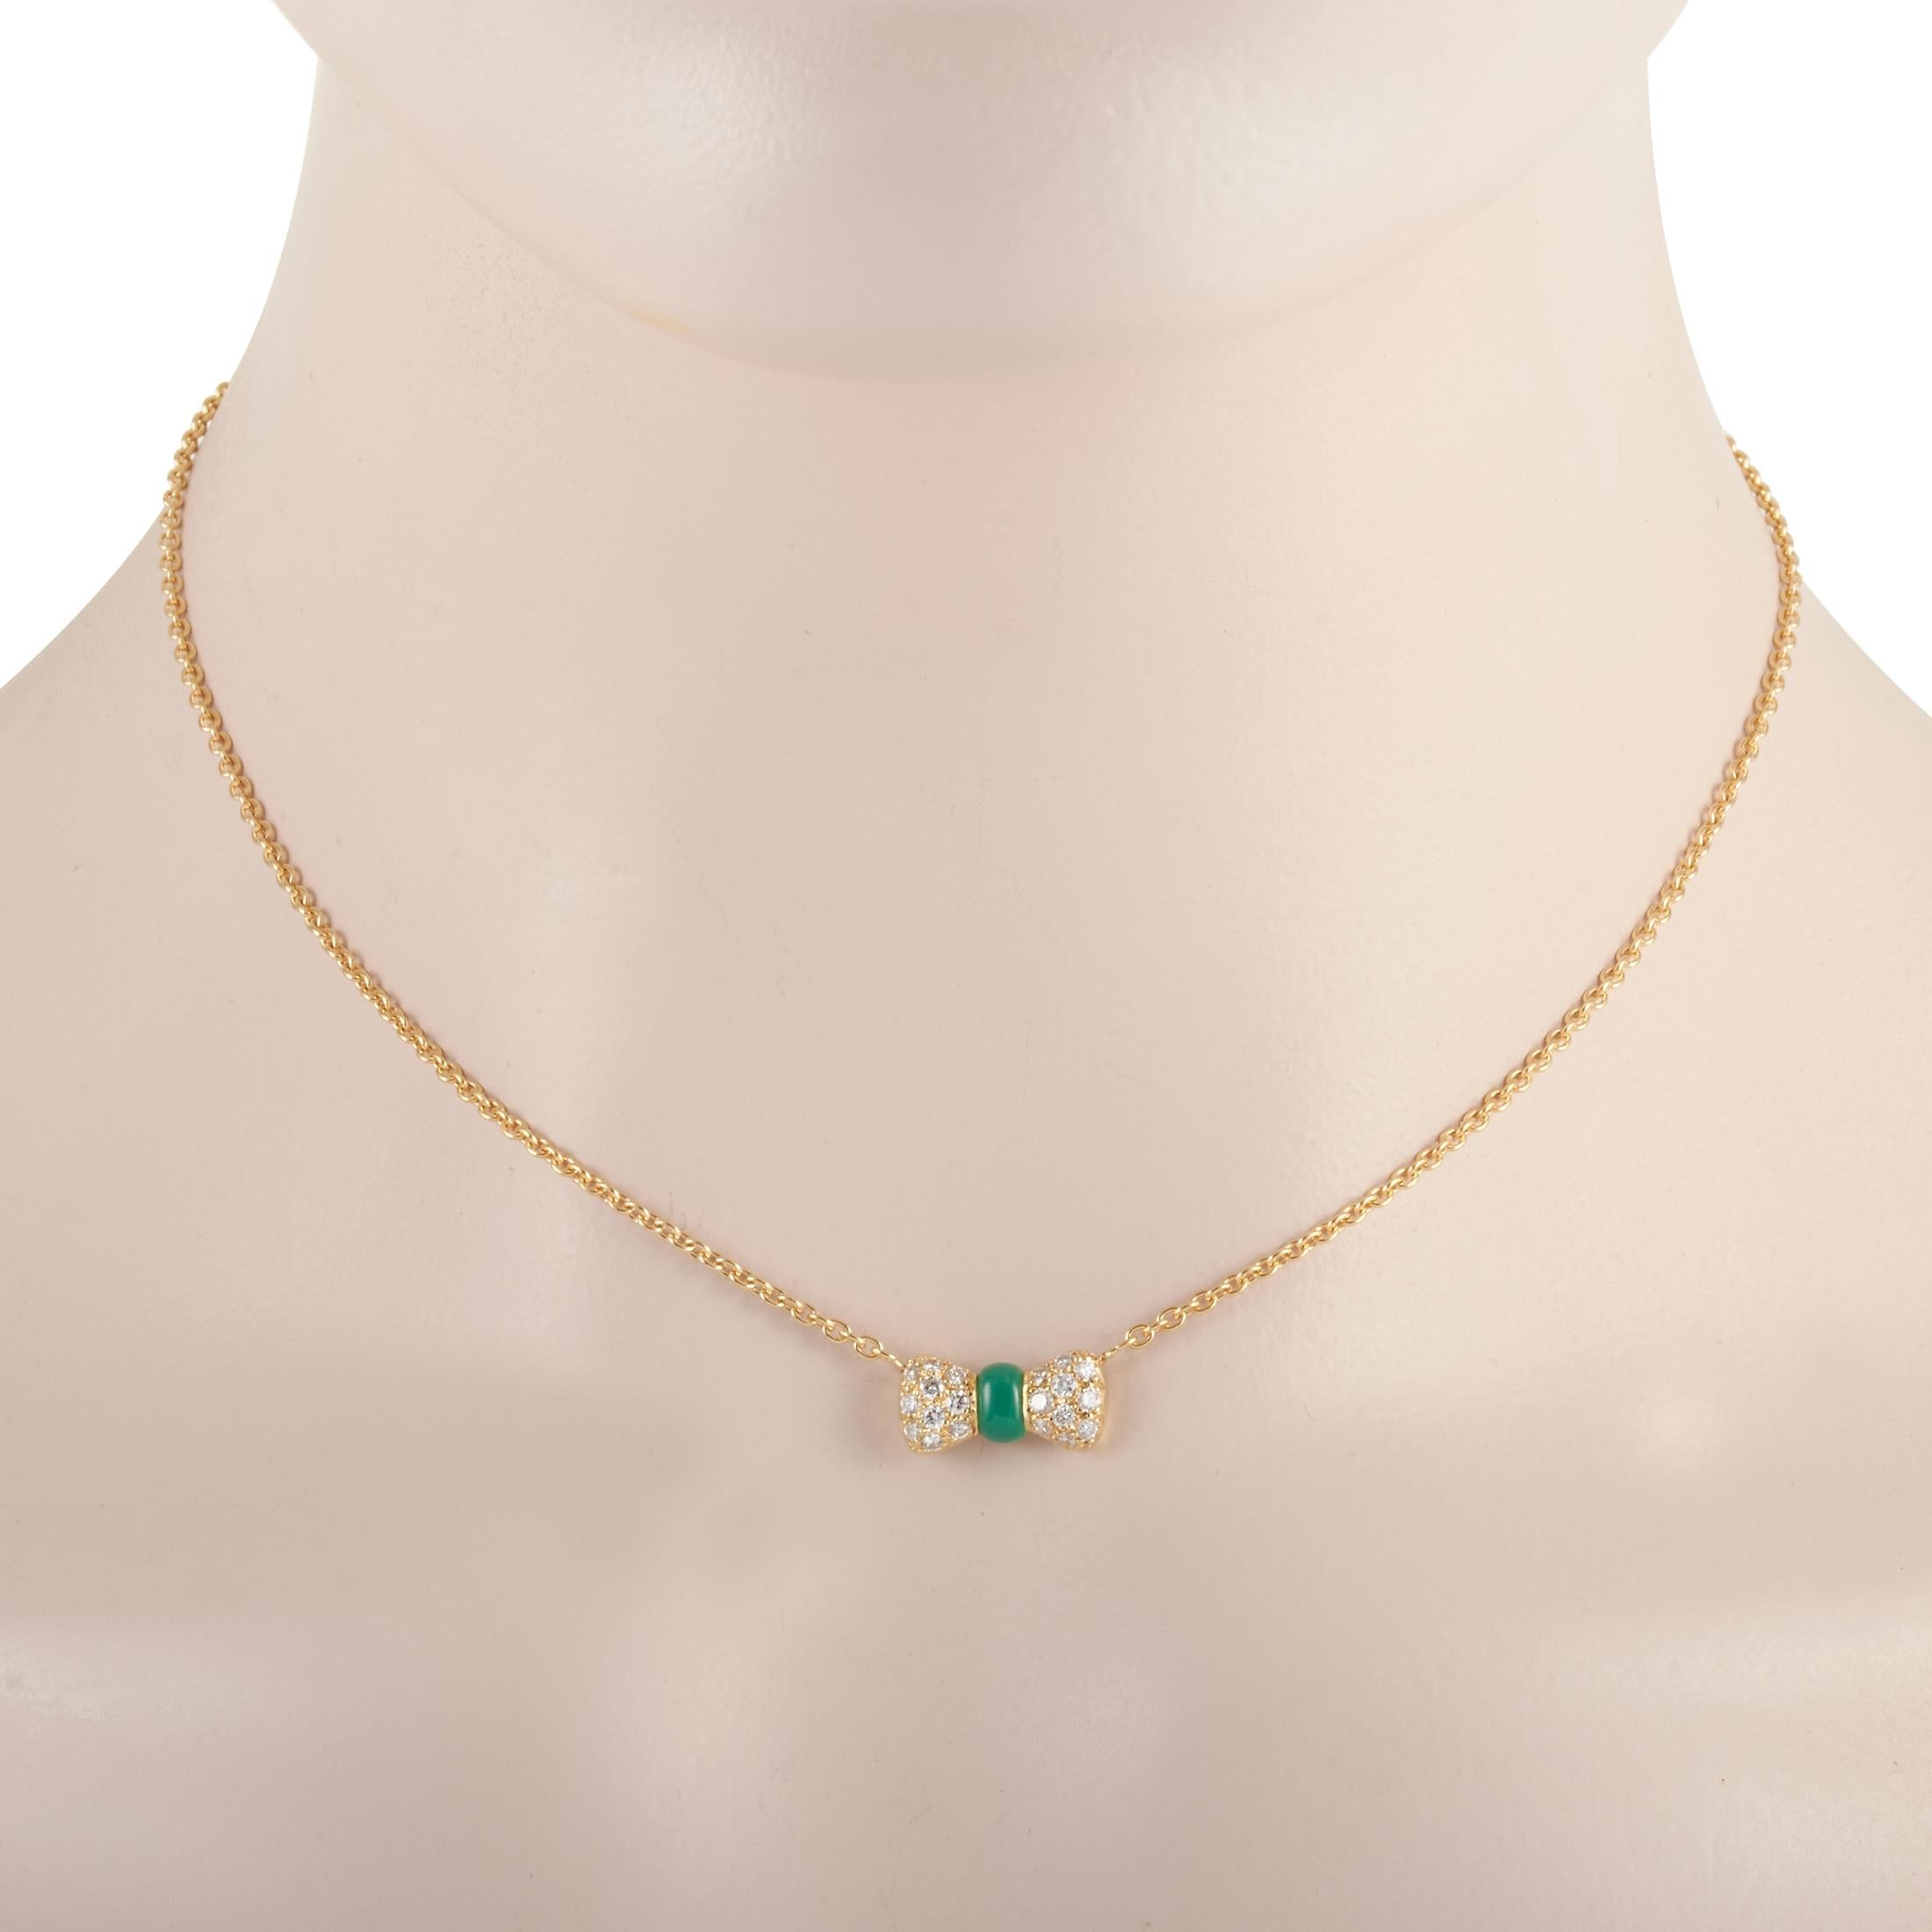 This Van Cleef & Arpels necklace is made of 18K yellow gold and embellished with a chrysoprase and a total of 0.39 carats of diamonds. The necklace weighs 5.5 grams and boasts a 14” chain and a pendant that measures 0.25” in length and 0.57” in